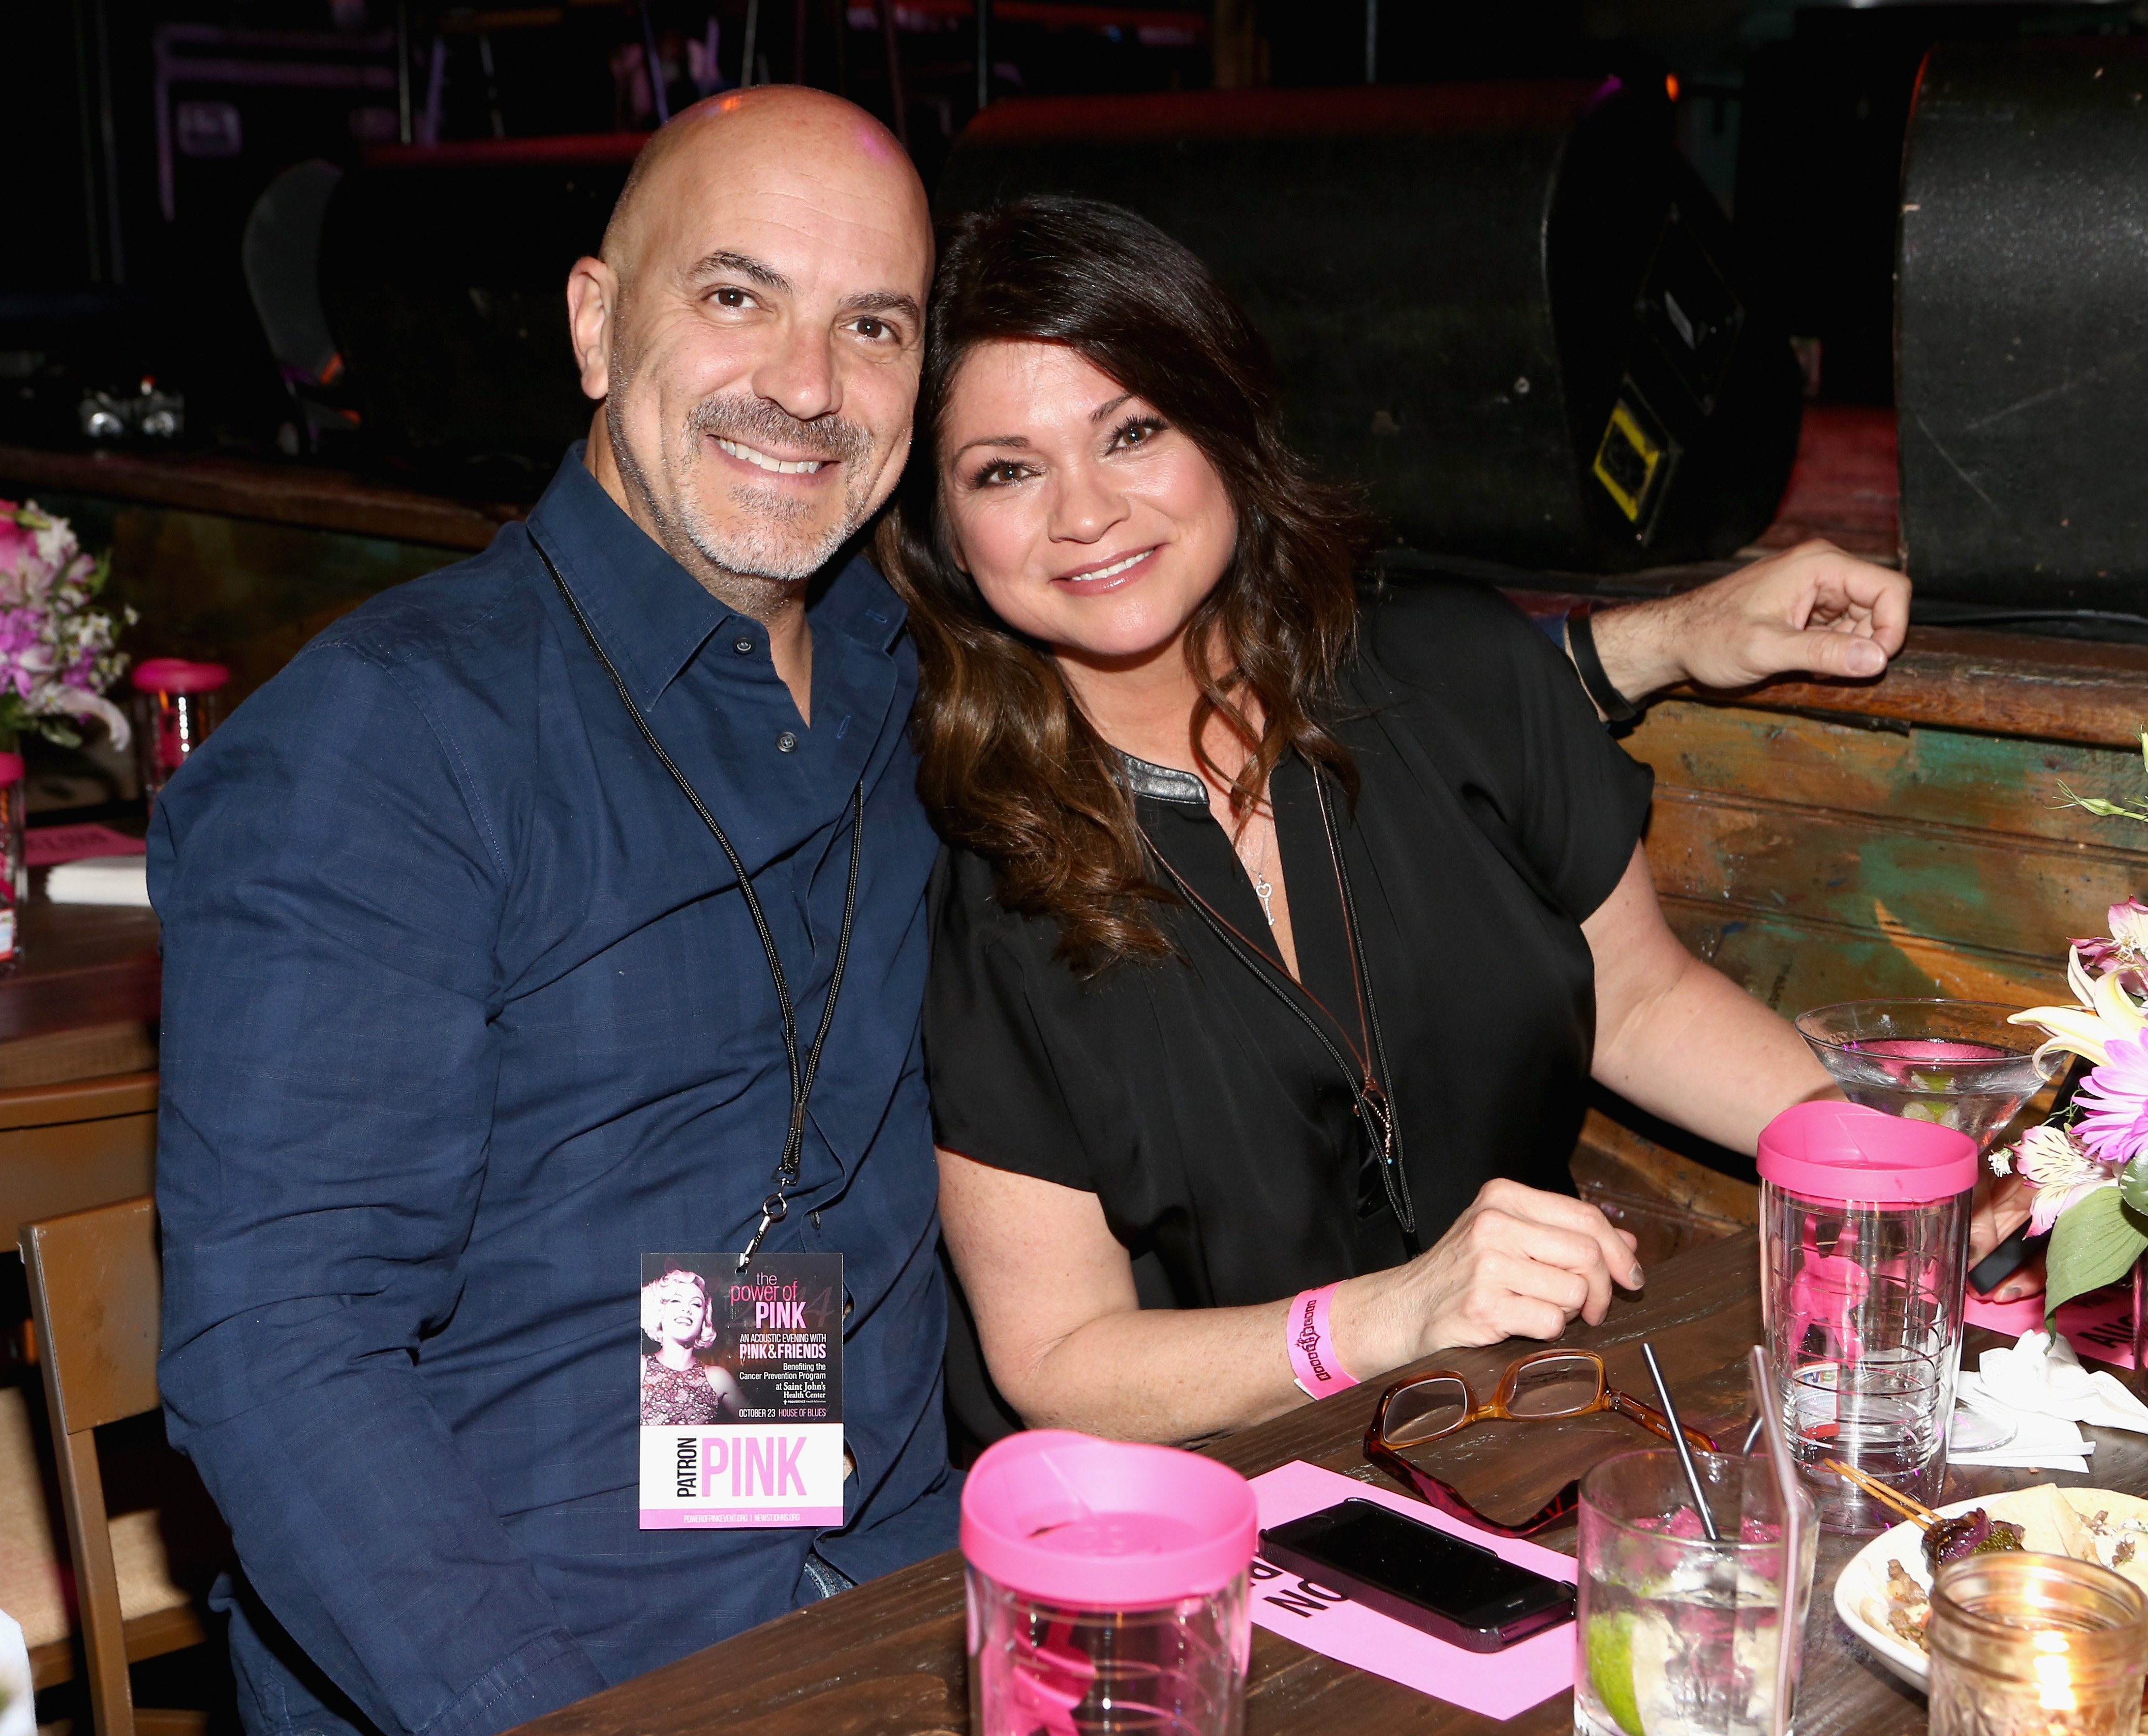 Tom Vitale and actress Valerie Bertinelli attend Power of Pink 2014 Benefiting the Cancer Prevention Program at Saint John's Health Center at House of Blues Sunset Strip on October 23, 2014 in West Hollywood, California. | Source: Getty Images